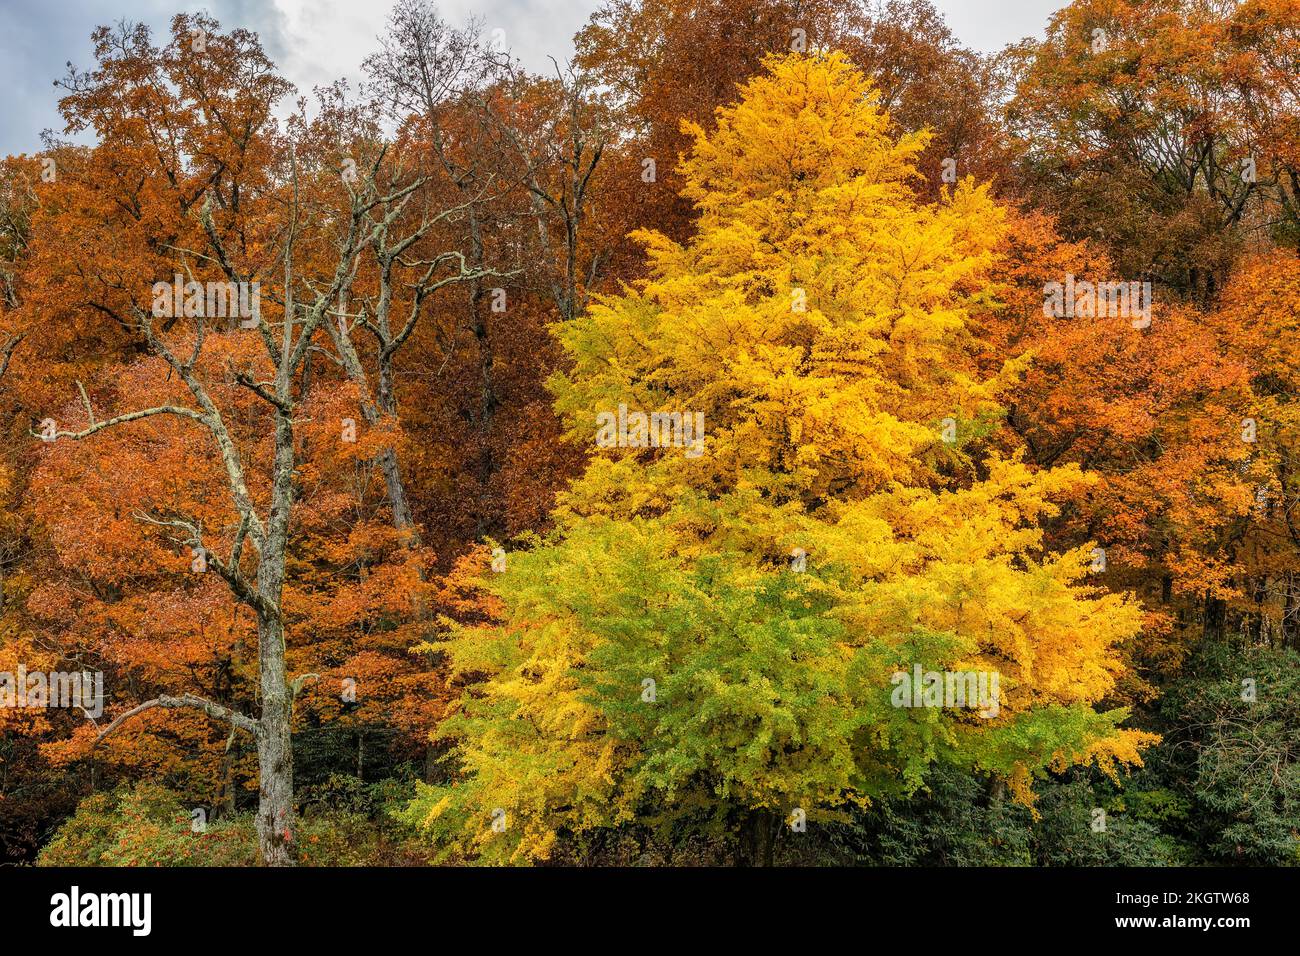 Different colors of autumn leaves on trees under cloudy skies along North Carolina's Blue Ridge Parkway. Stock Photo